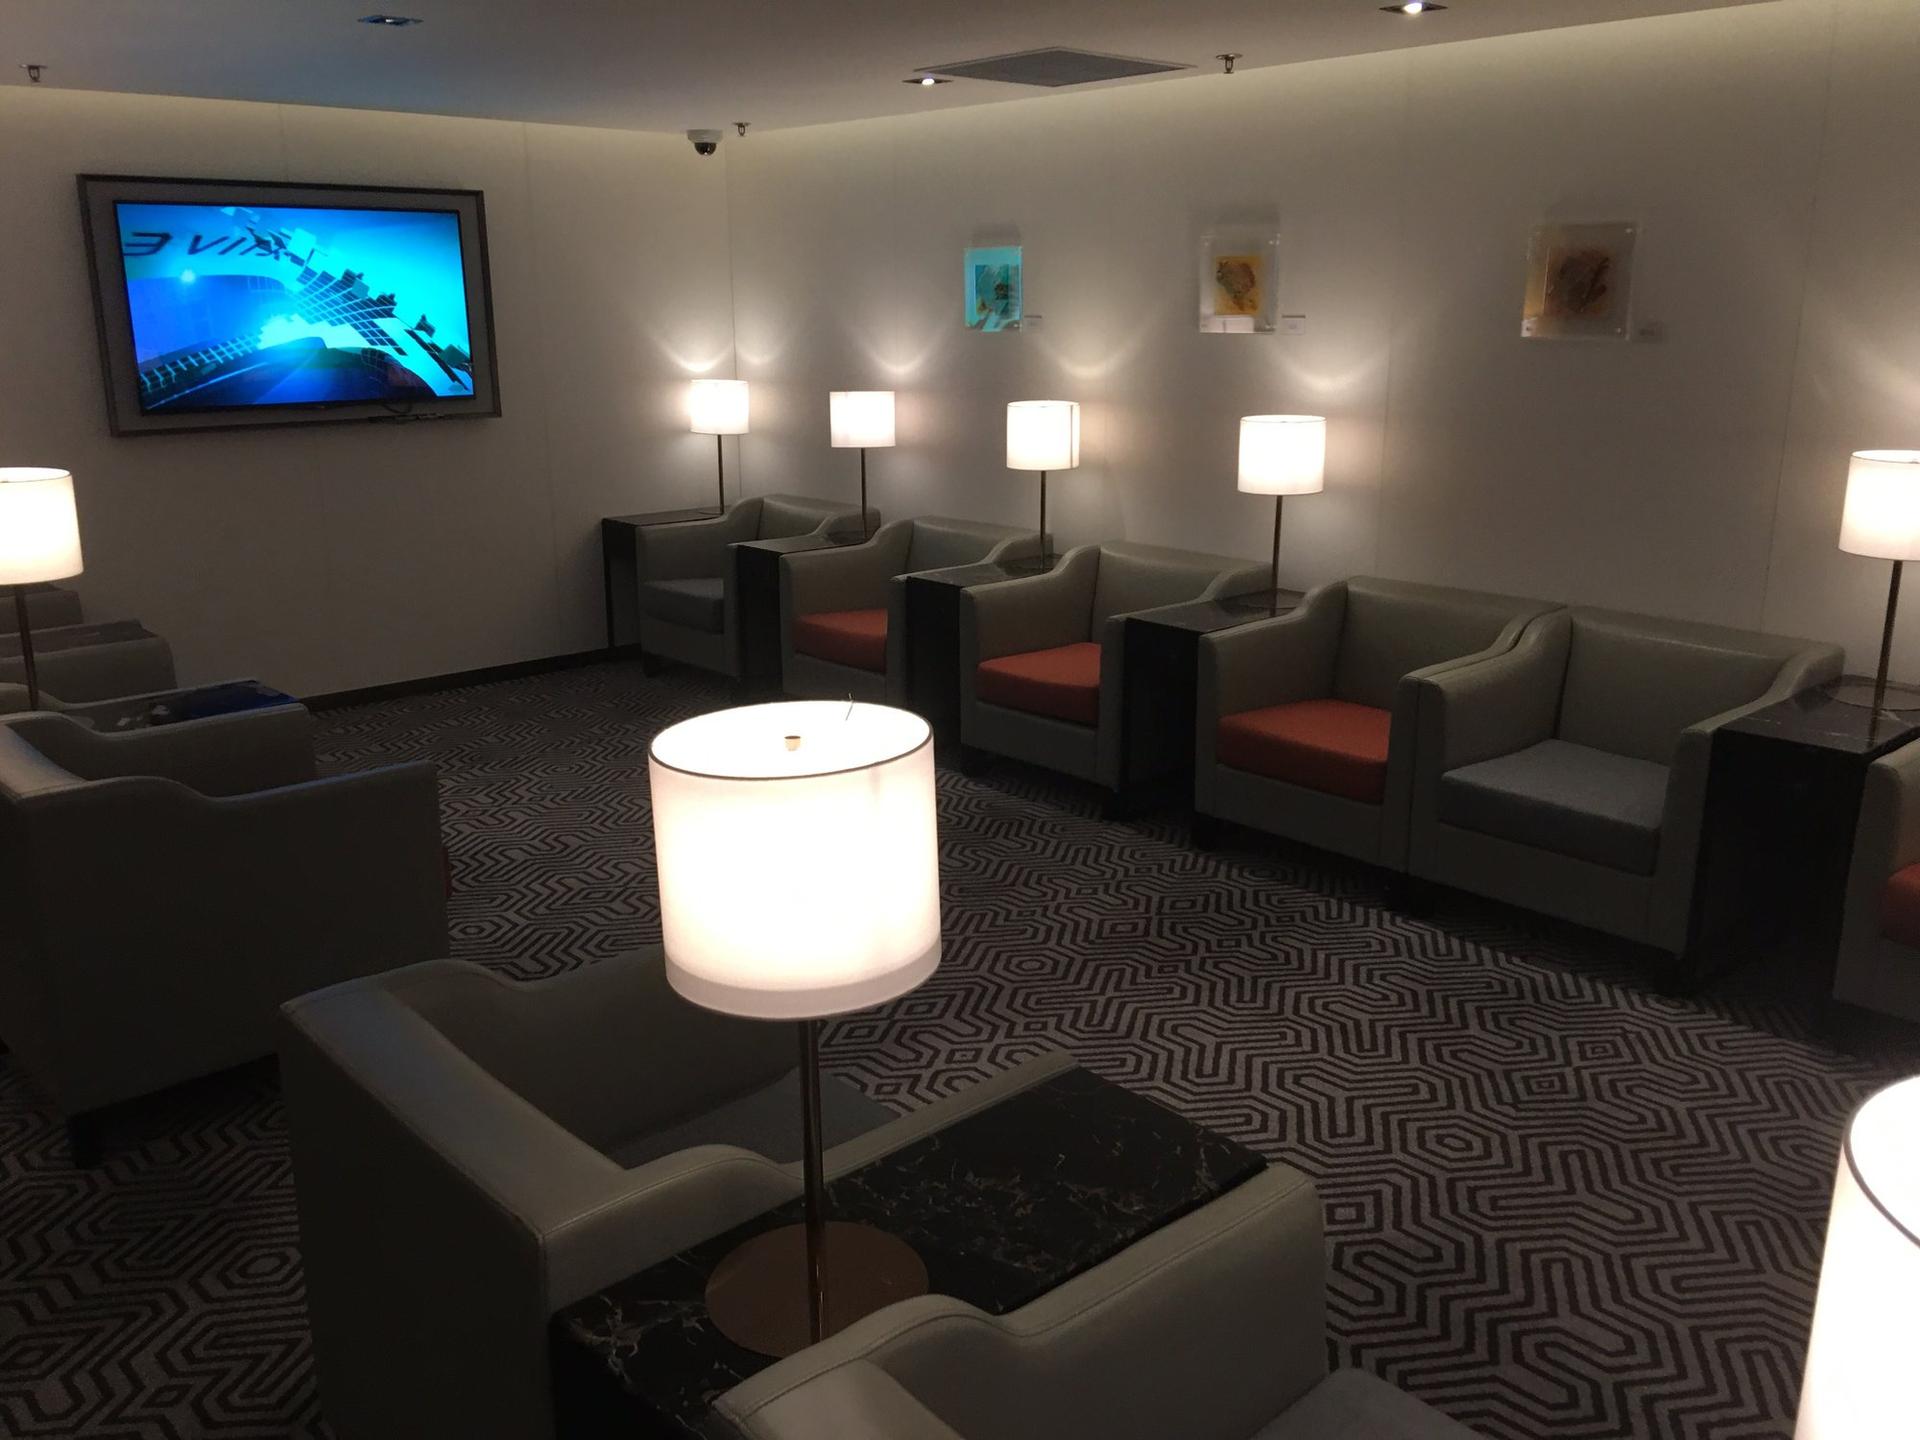 Singapore Airlines SilverKris Business Class Lounge image 49 of 68